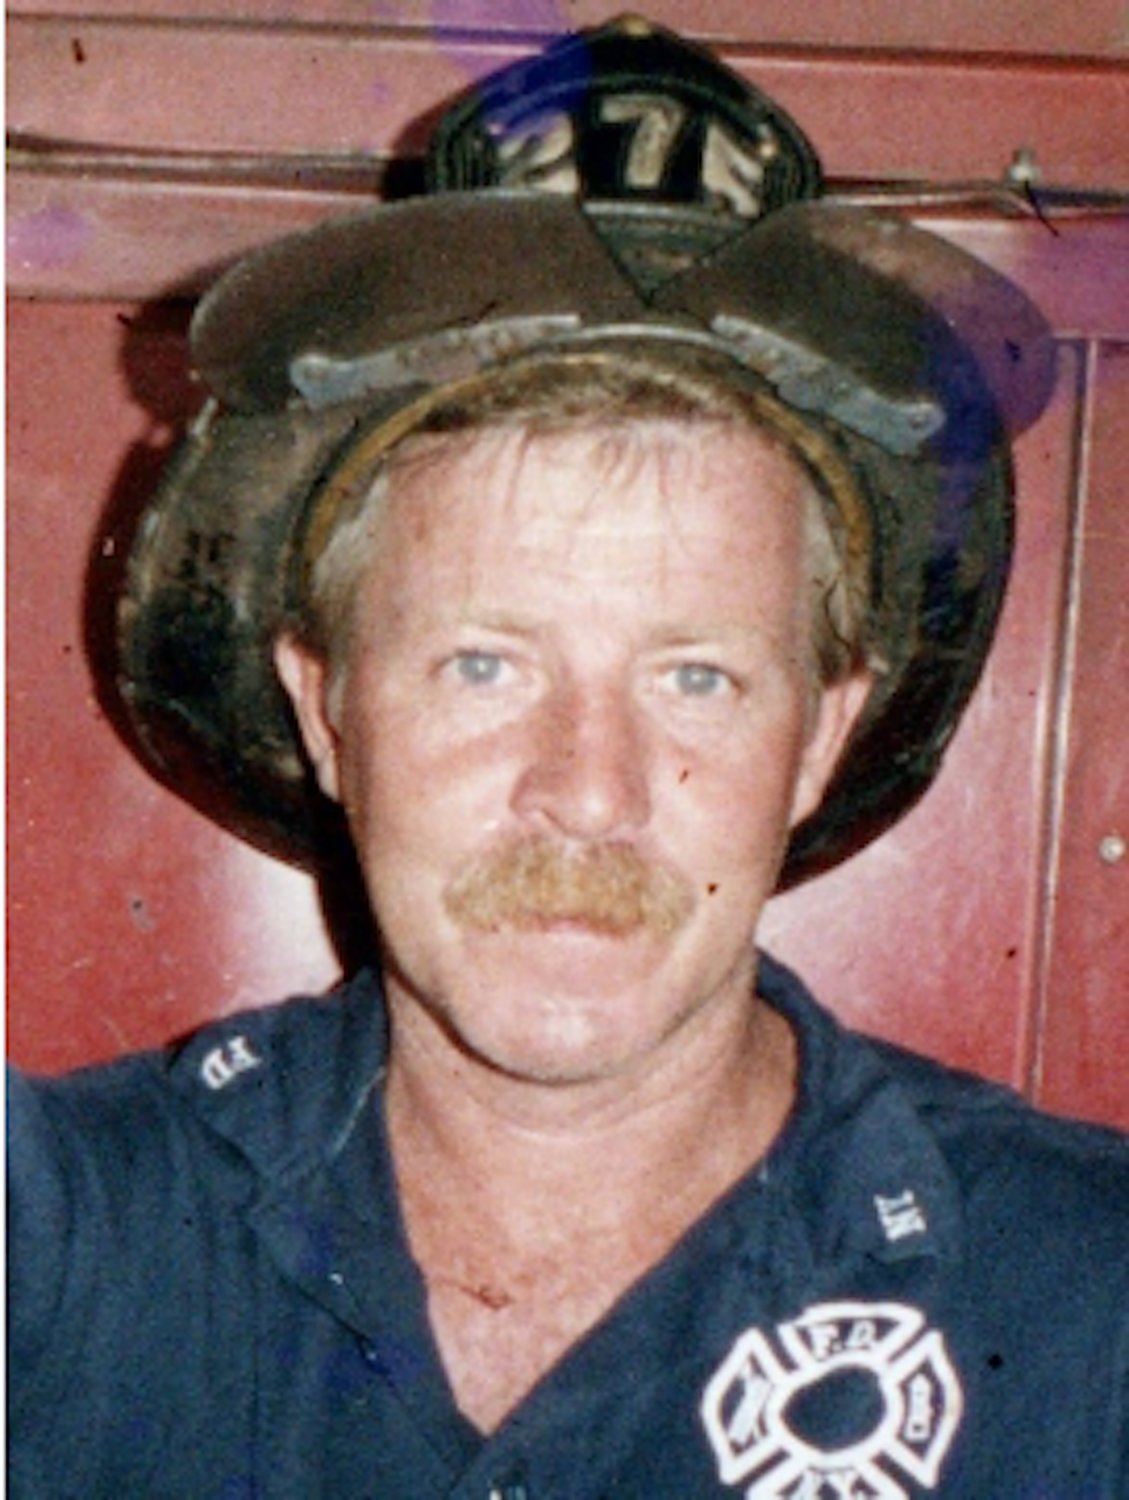 George Tripptree, a retired FDNY firefighter, died September 23 after succumbing to World Trade Center related illness.